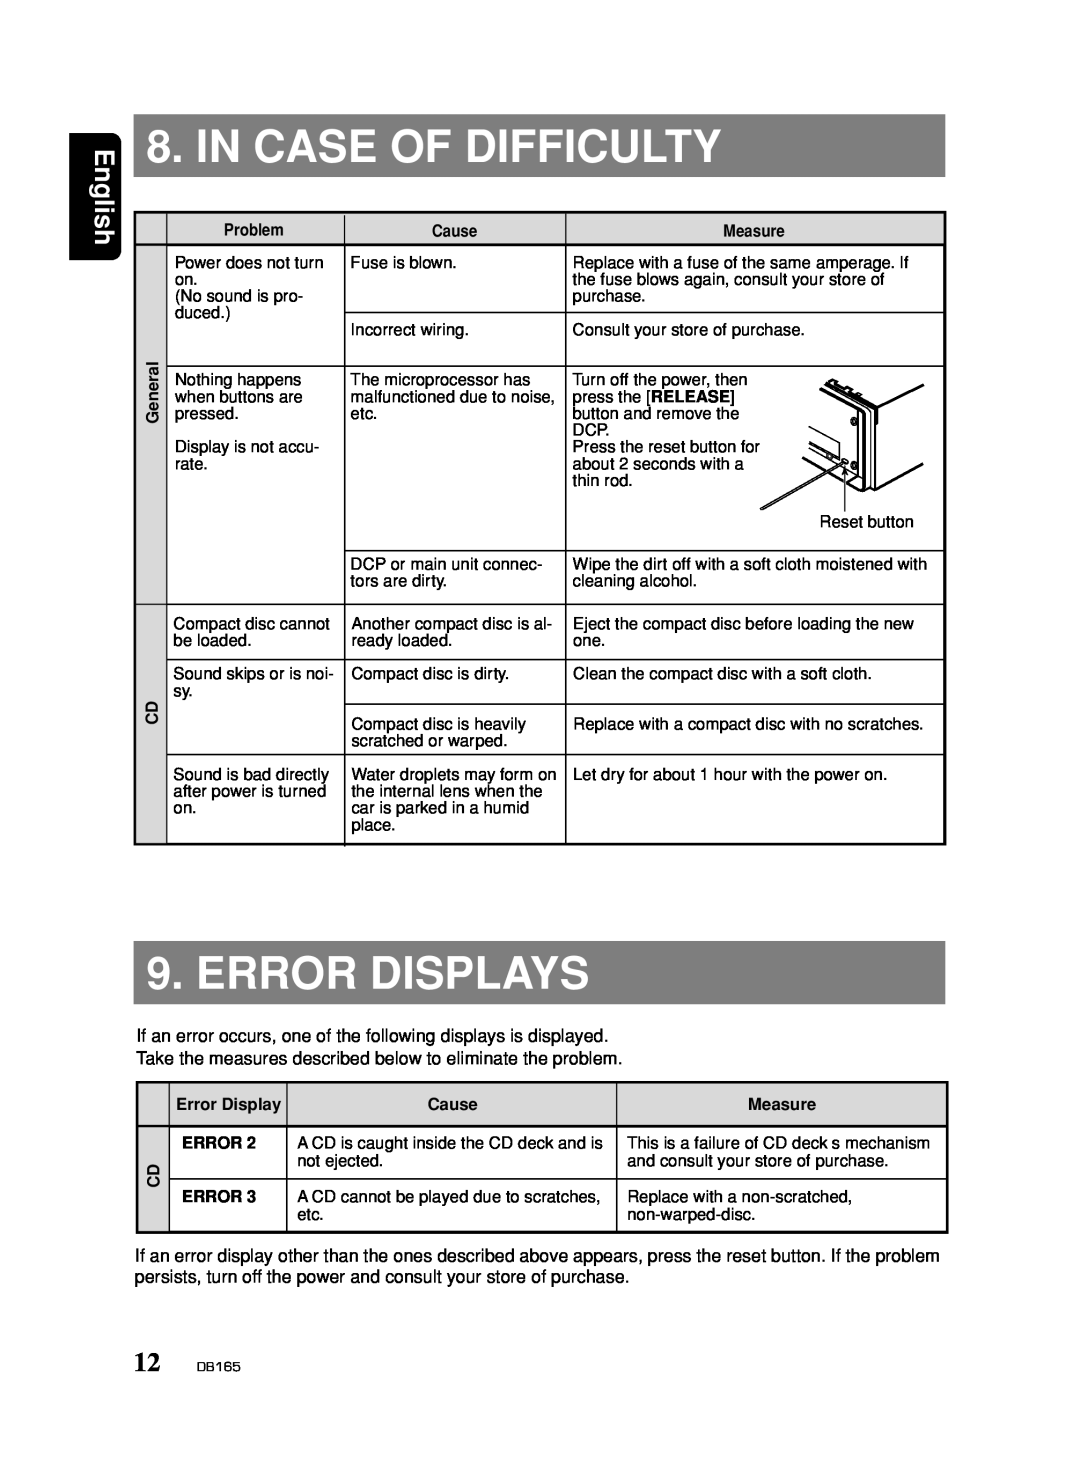 Clarion DB165 owner manual In Case Of Difficulty, Error Displays, English, Problem, Cause, Measure 